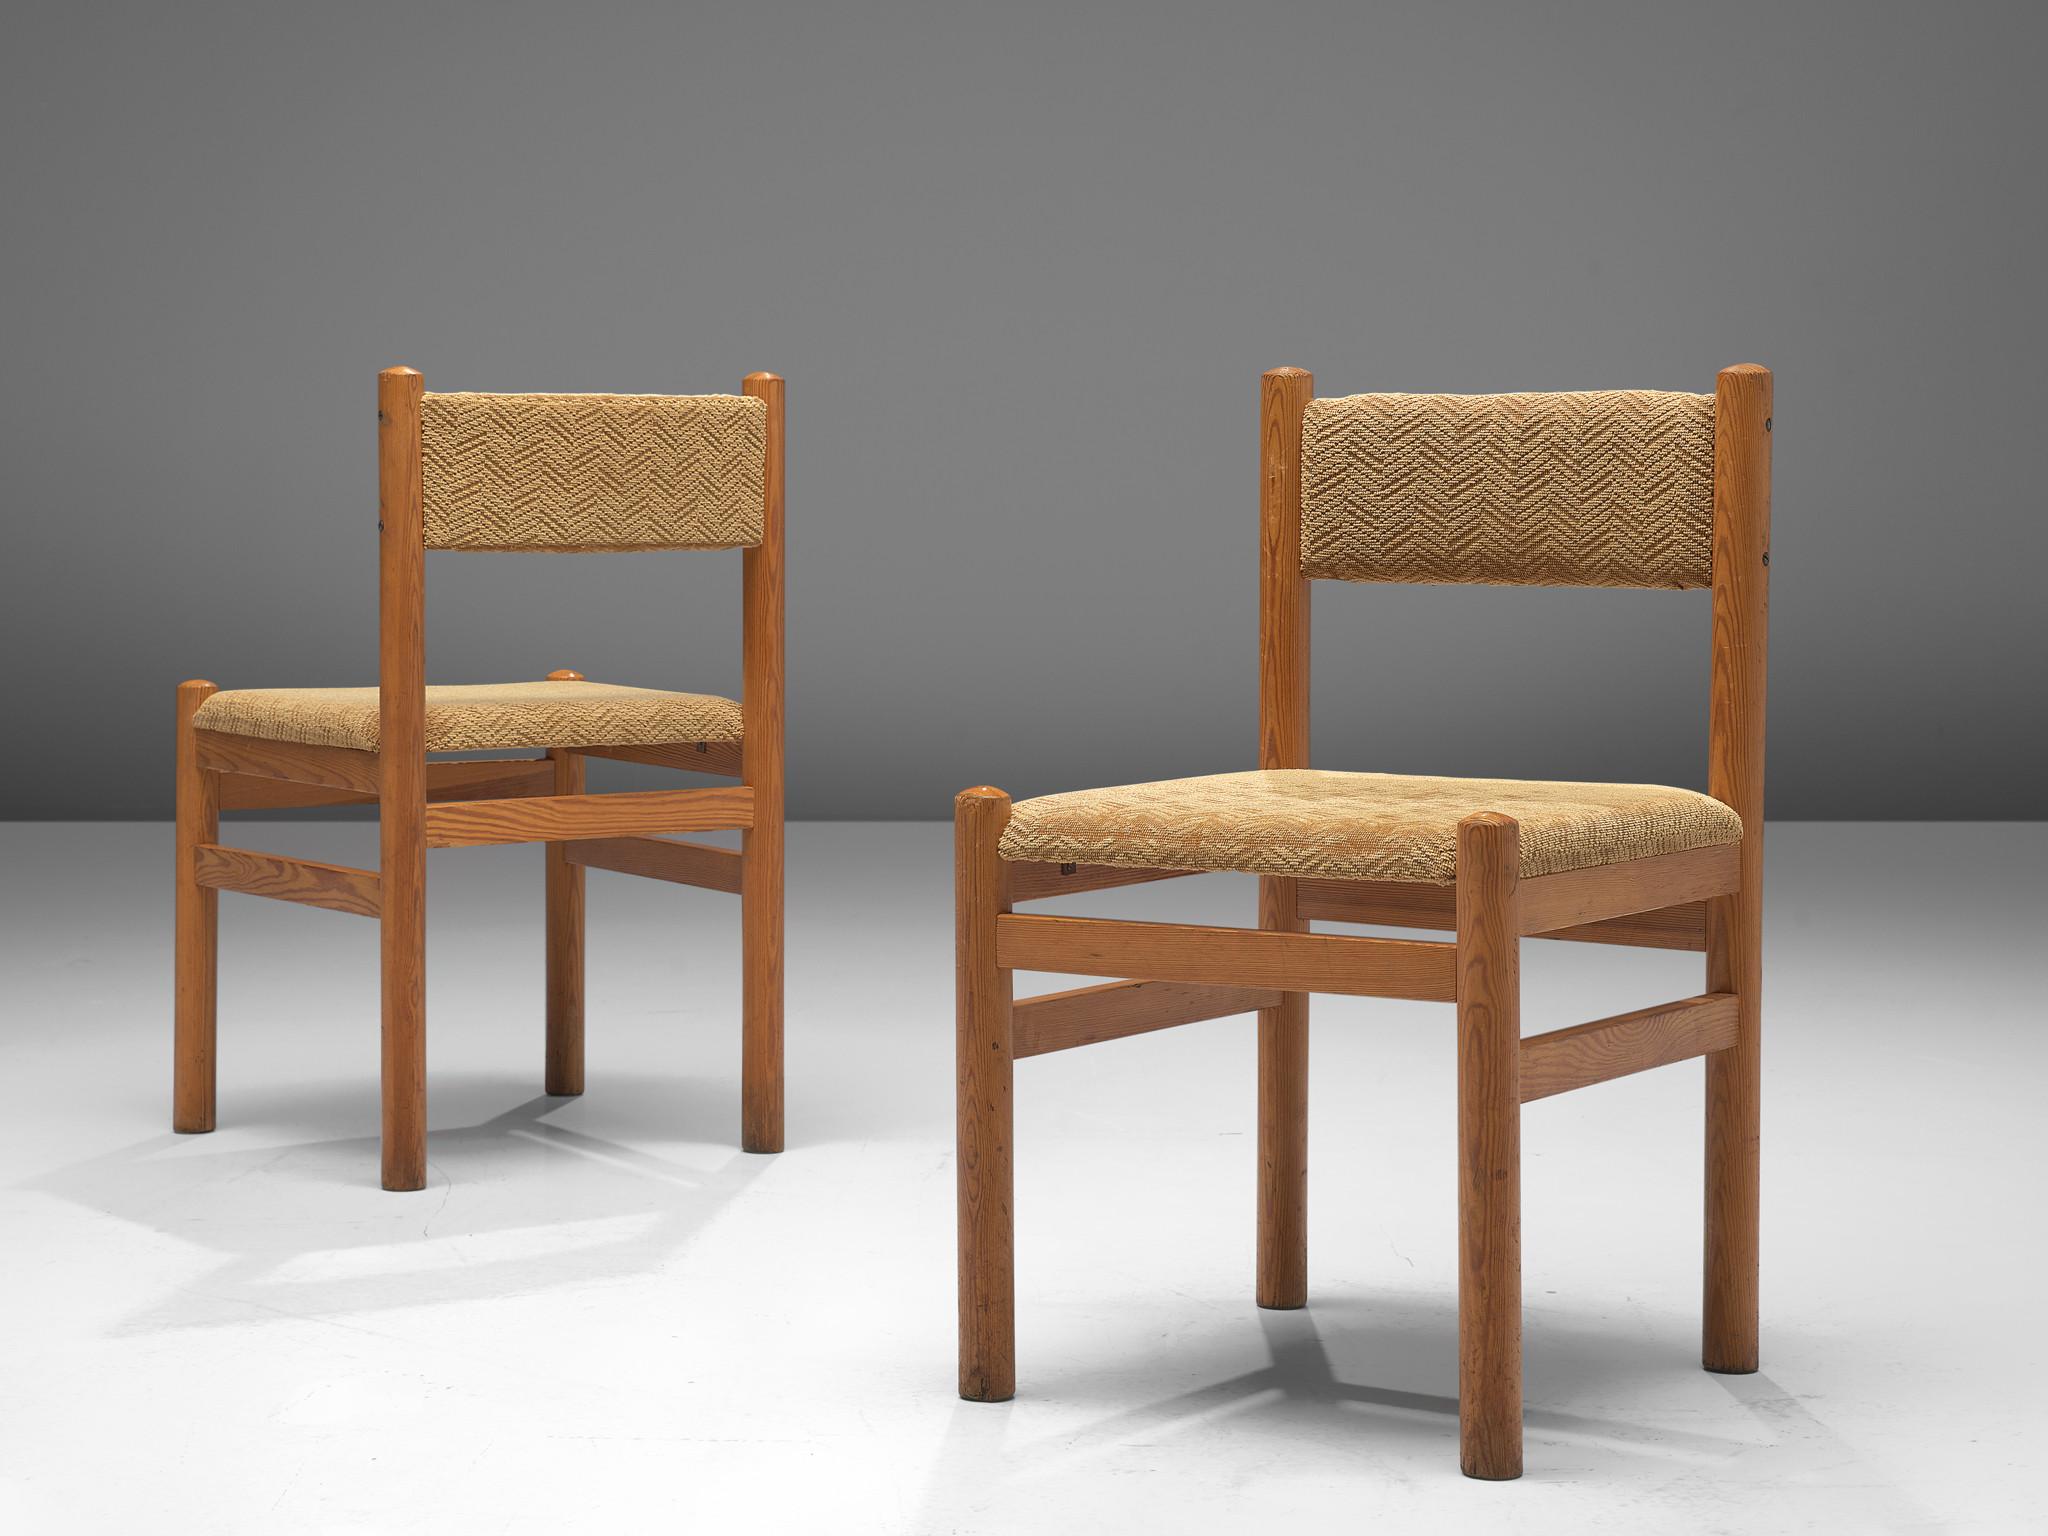 Dining chairs, pine and fabric, Europe, 1950s

Pine dining chairs with beige fishbone patterned upholstery, model without armrests. The elegant designed open shape of the frame in combination with the natural color upholstery makes this chair very